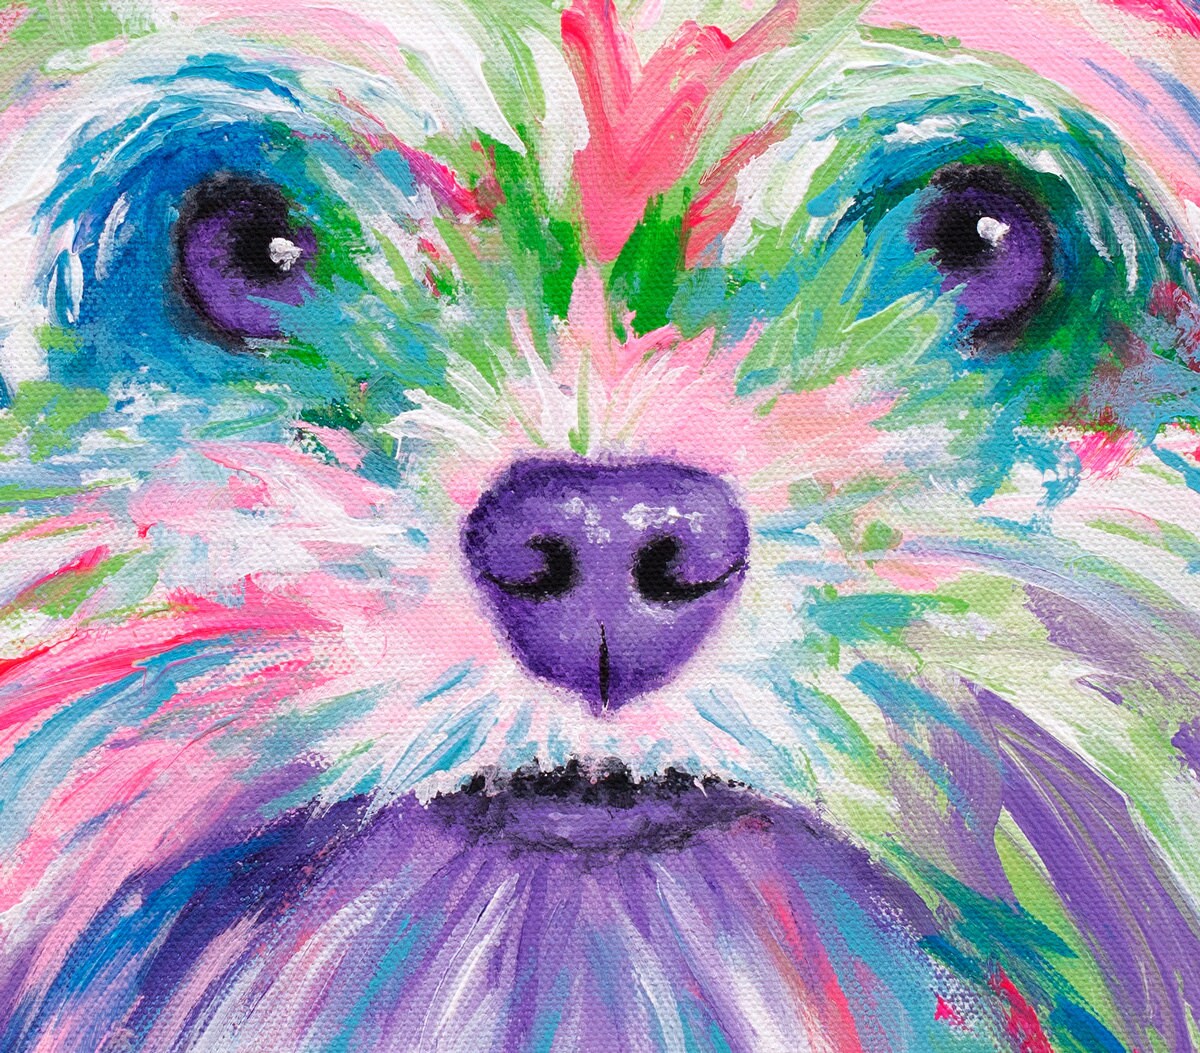 Yorkie Art - Yorkshire Terrier Gifts. Dog Print on CANVAS or PAPER. Yorkie Painting by Krystle Cole